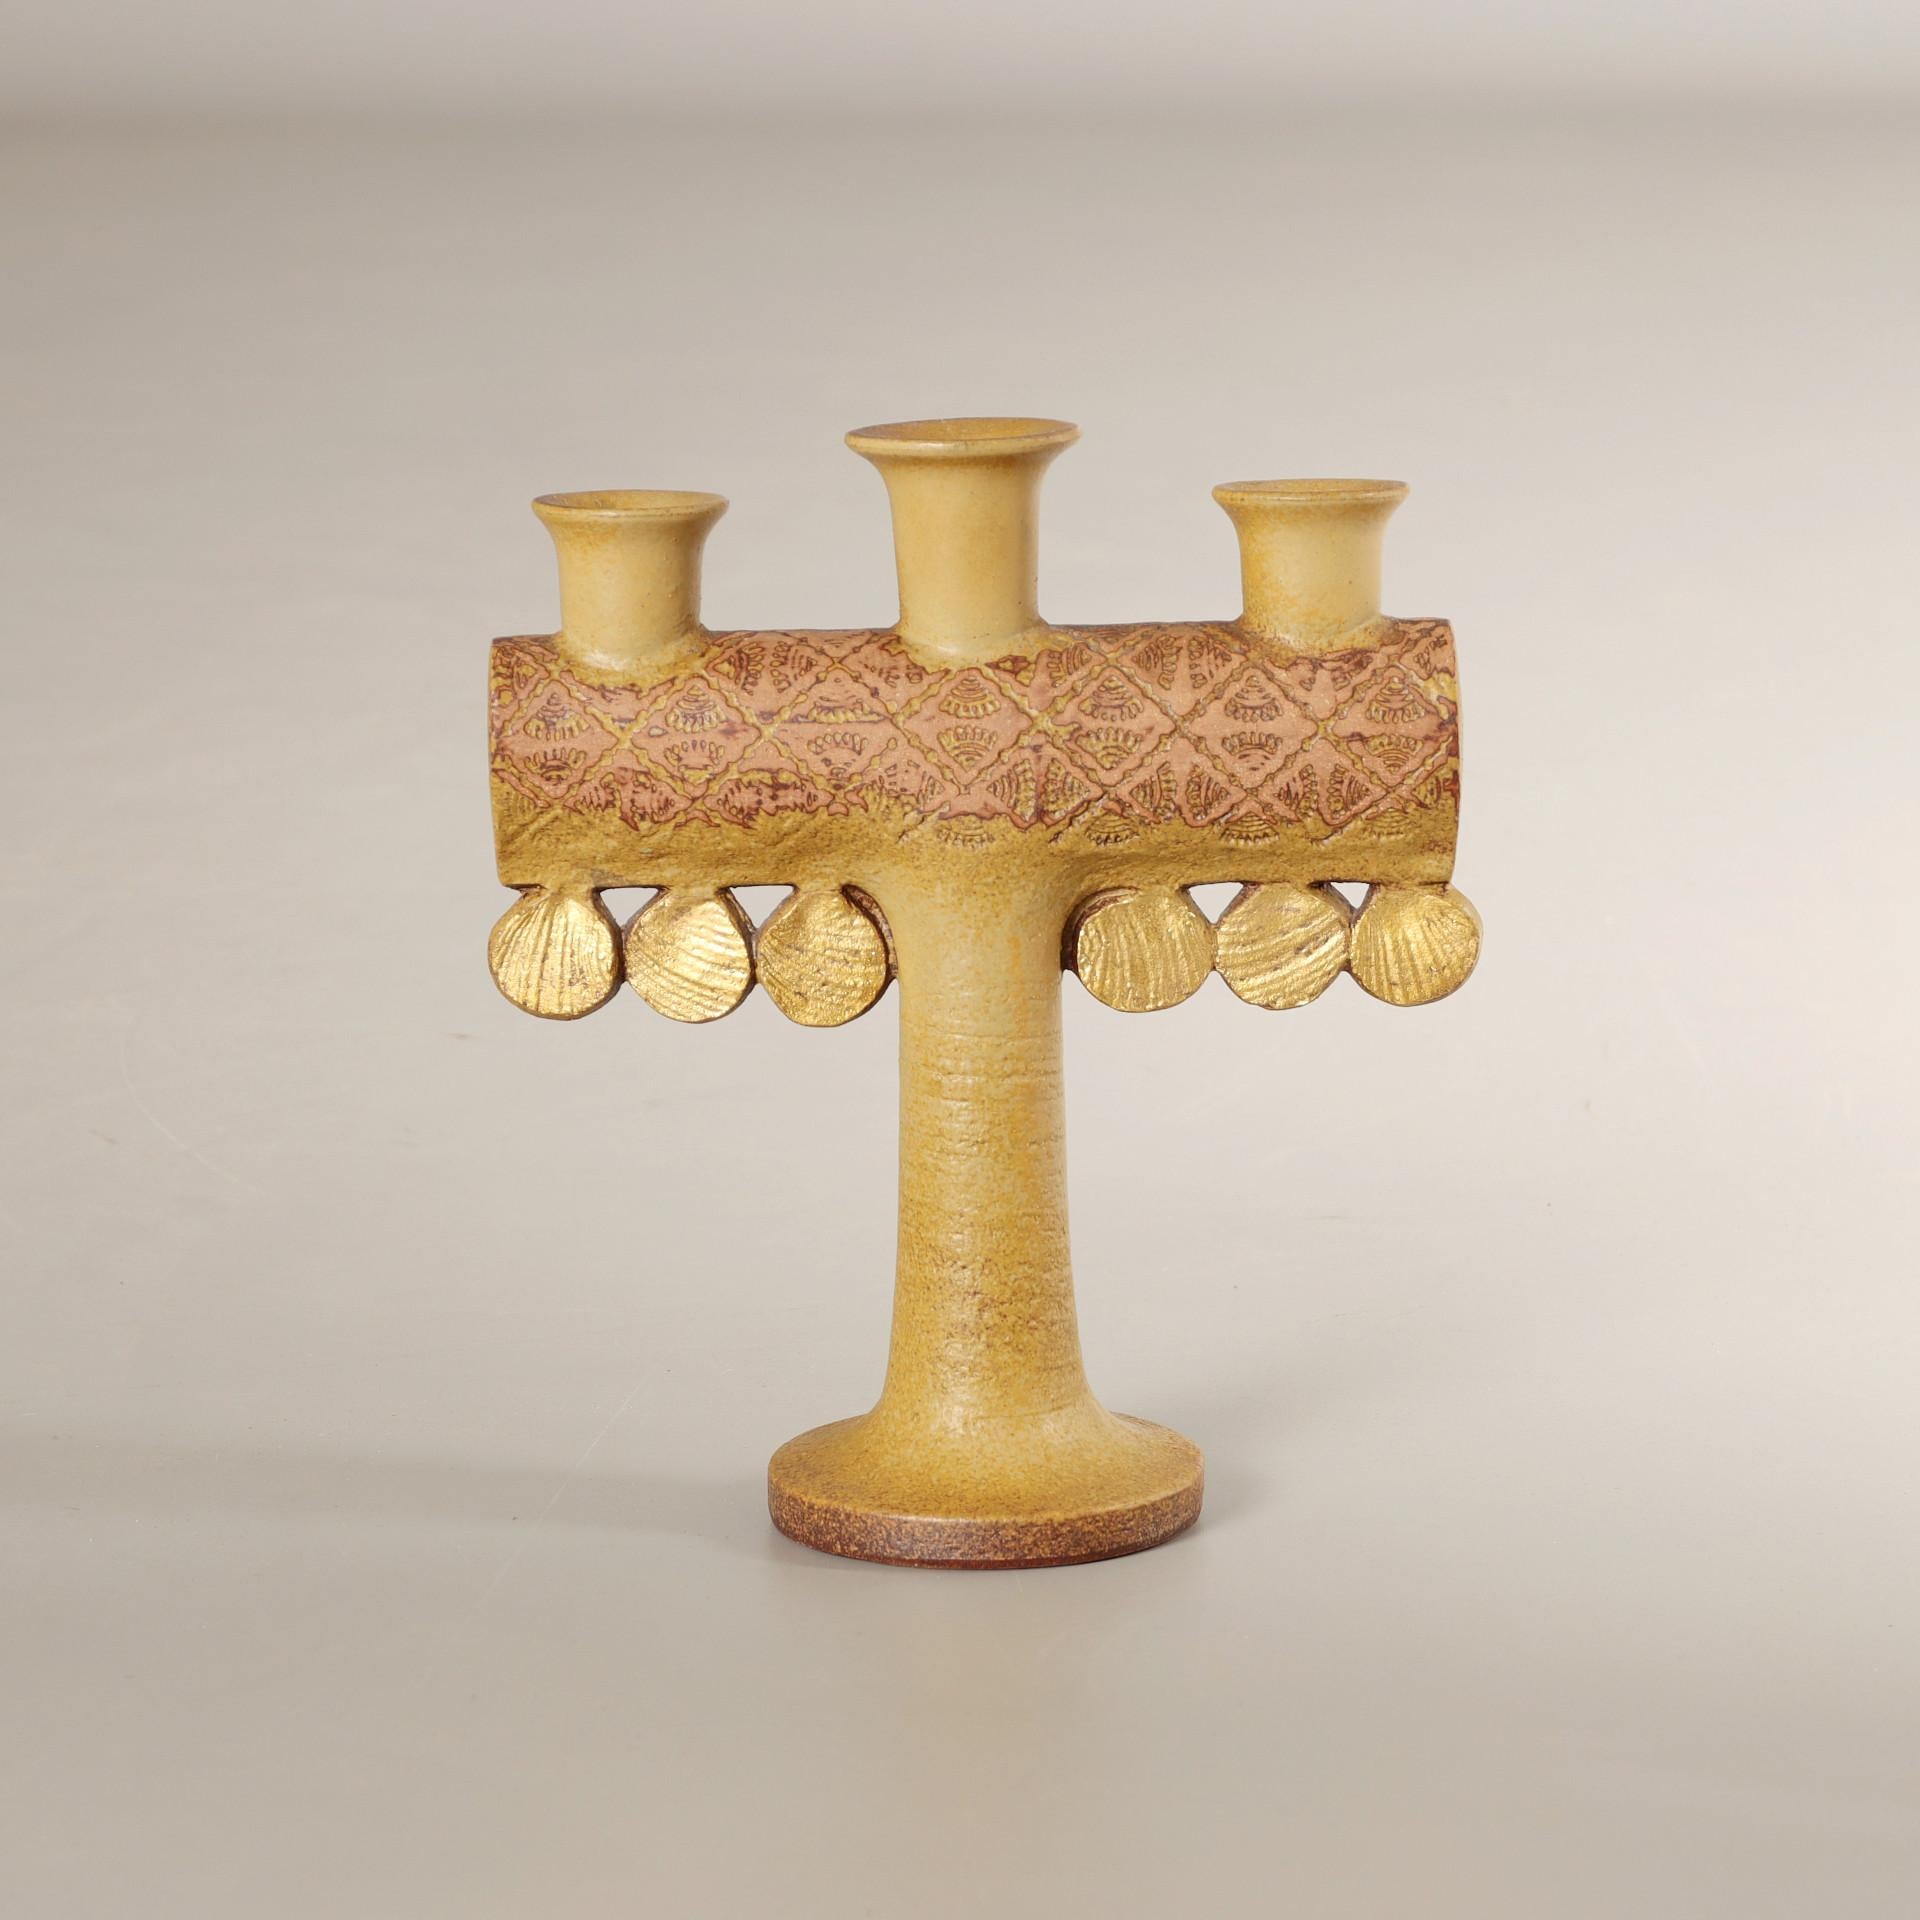 candlestick by Lisa Larson 'Medallion' Gustavsberg Sweden 1960 In Good Condition For Sale In Paris, FR